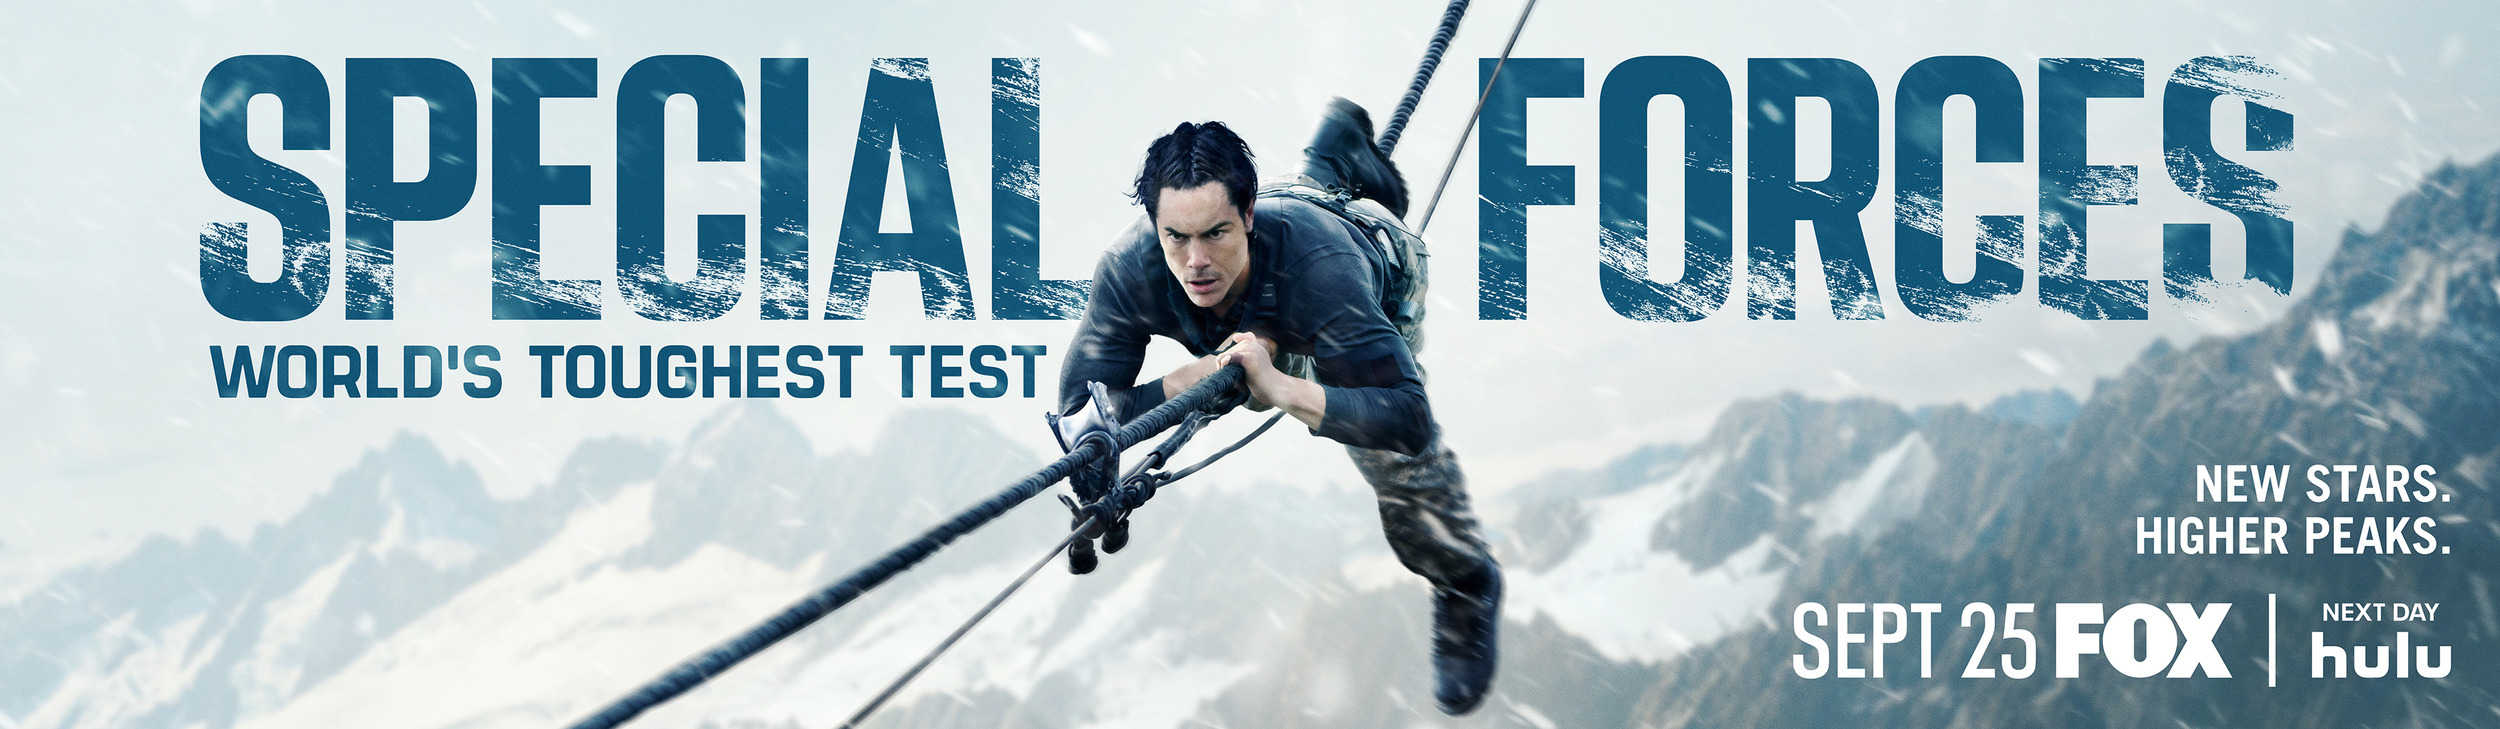 Mega Sized TV Poster Image for Special Forces: World's Toughest Test (#3 of 3)